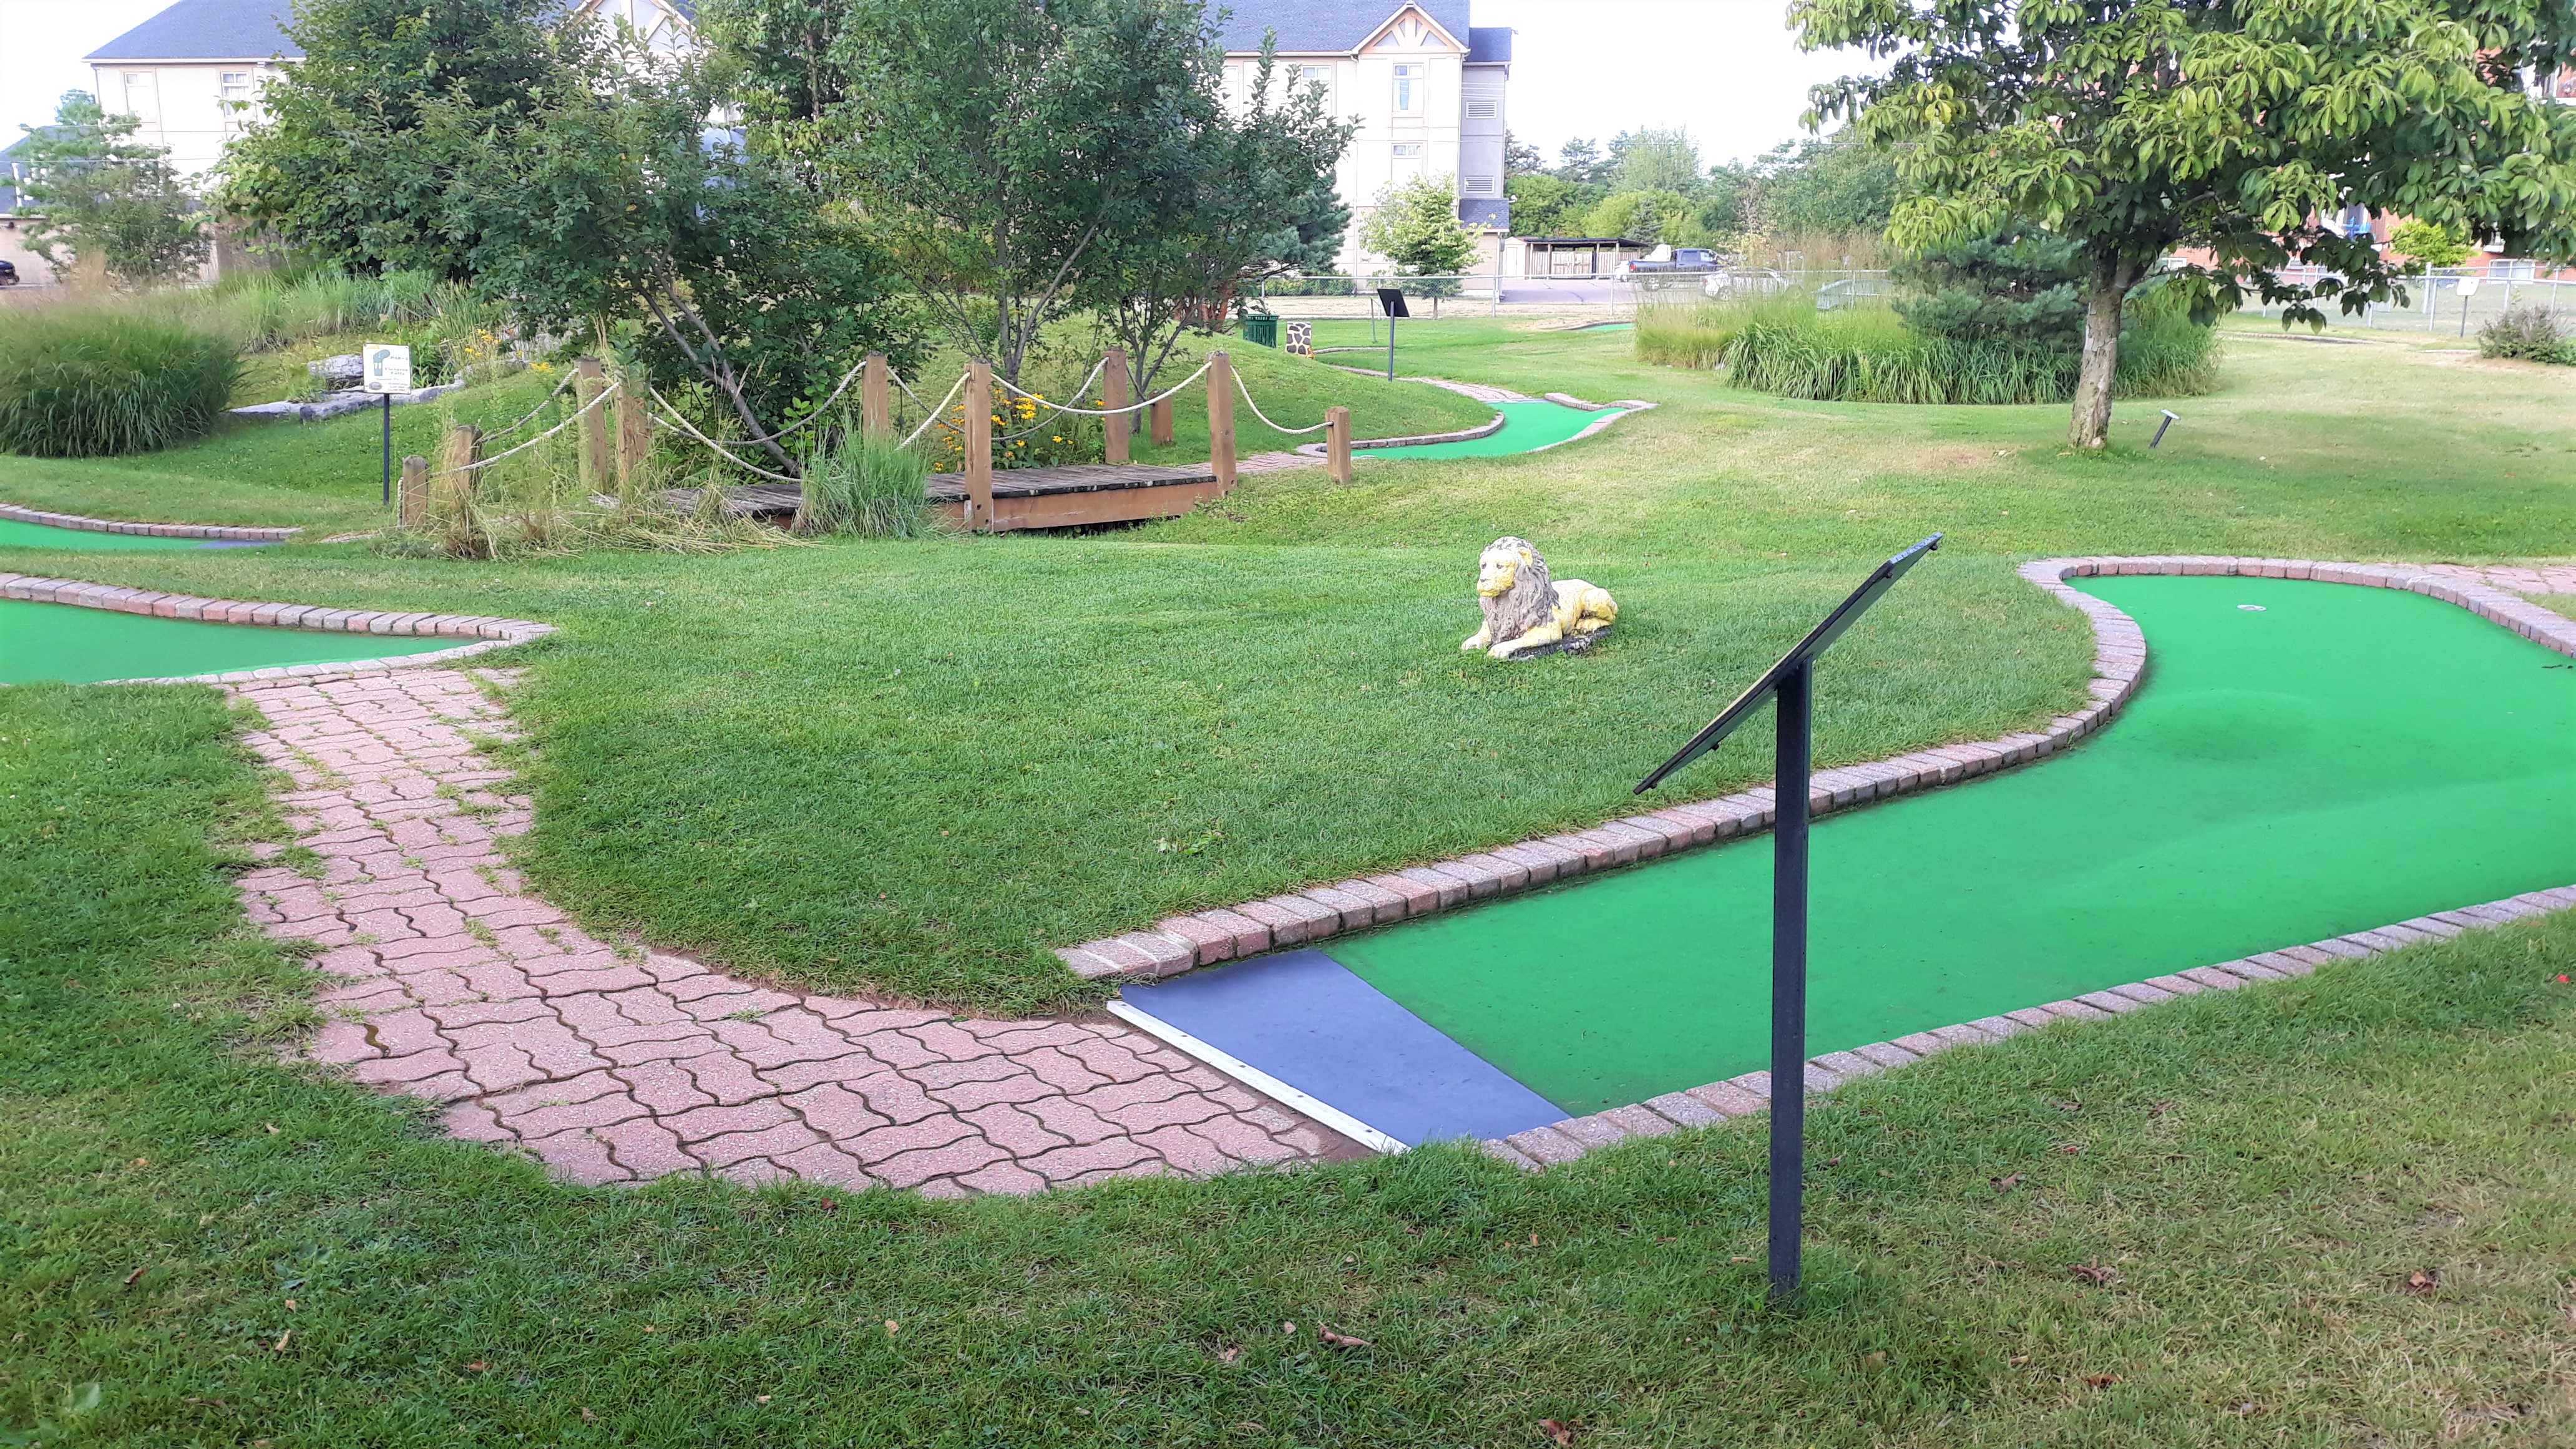 image of mini-putt greens and park area